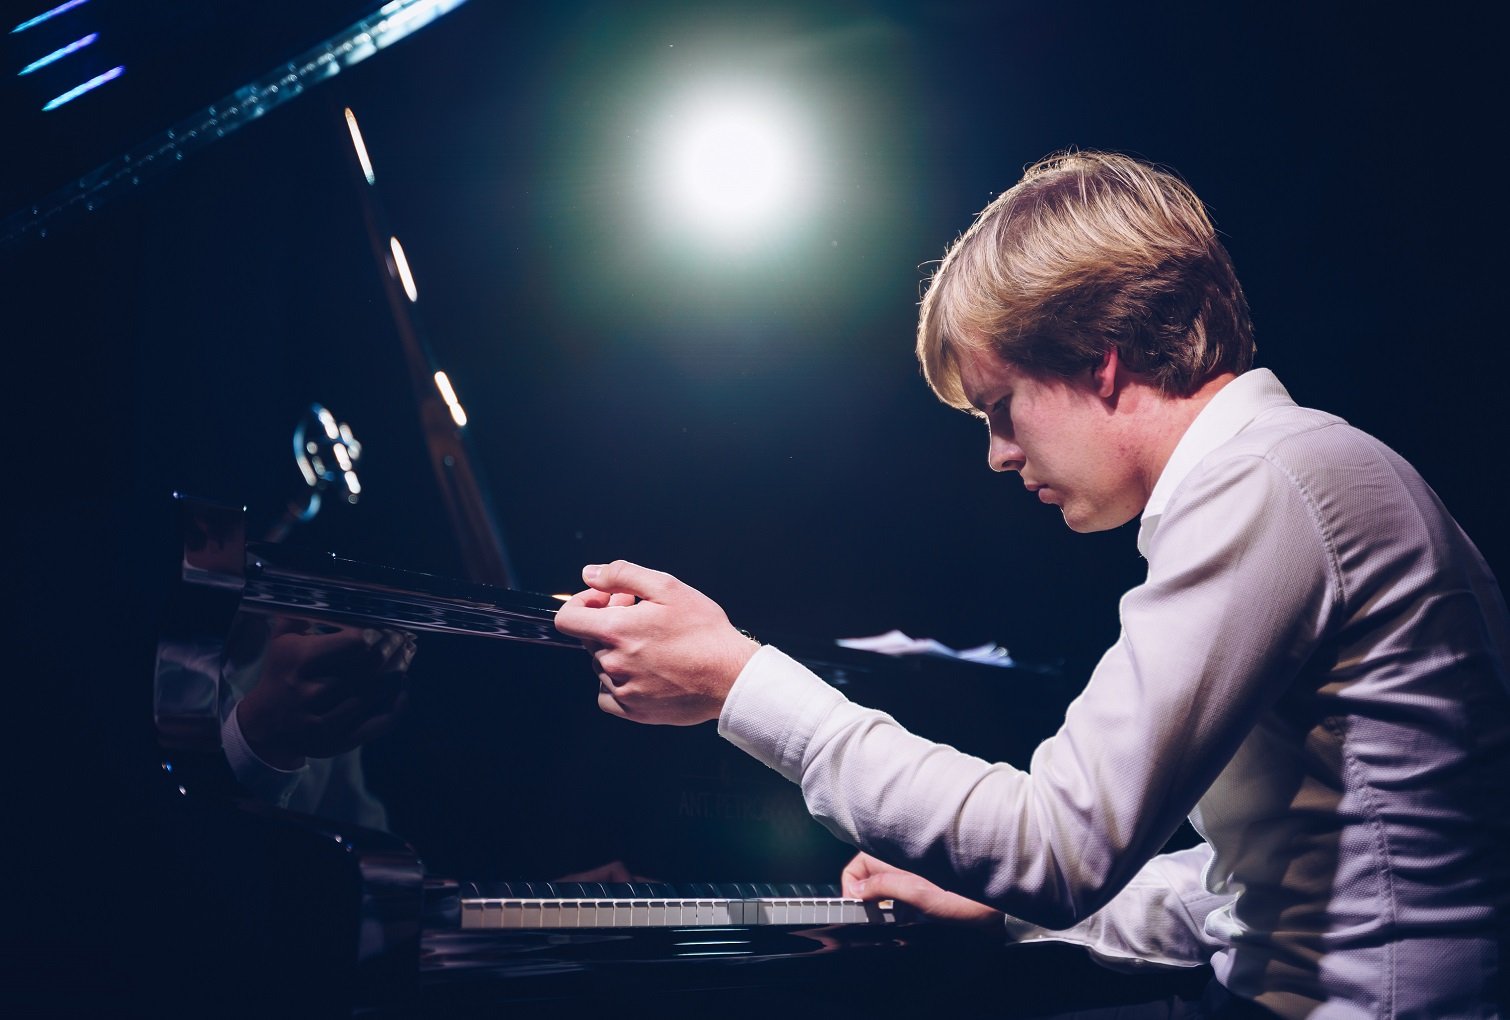 Matyáš Novák is the only Czech to reach the finals of the piano competition in Santander